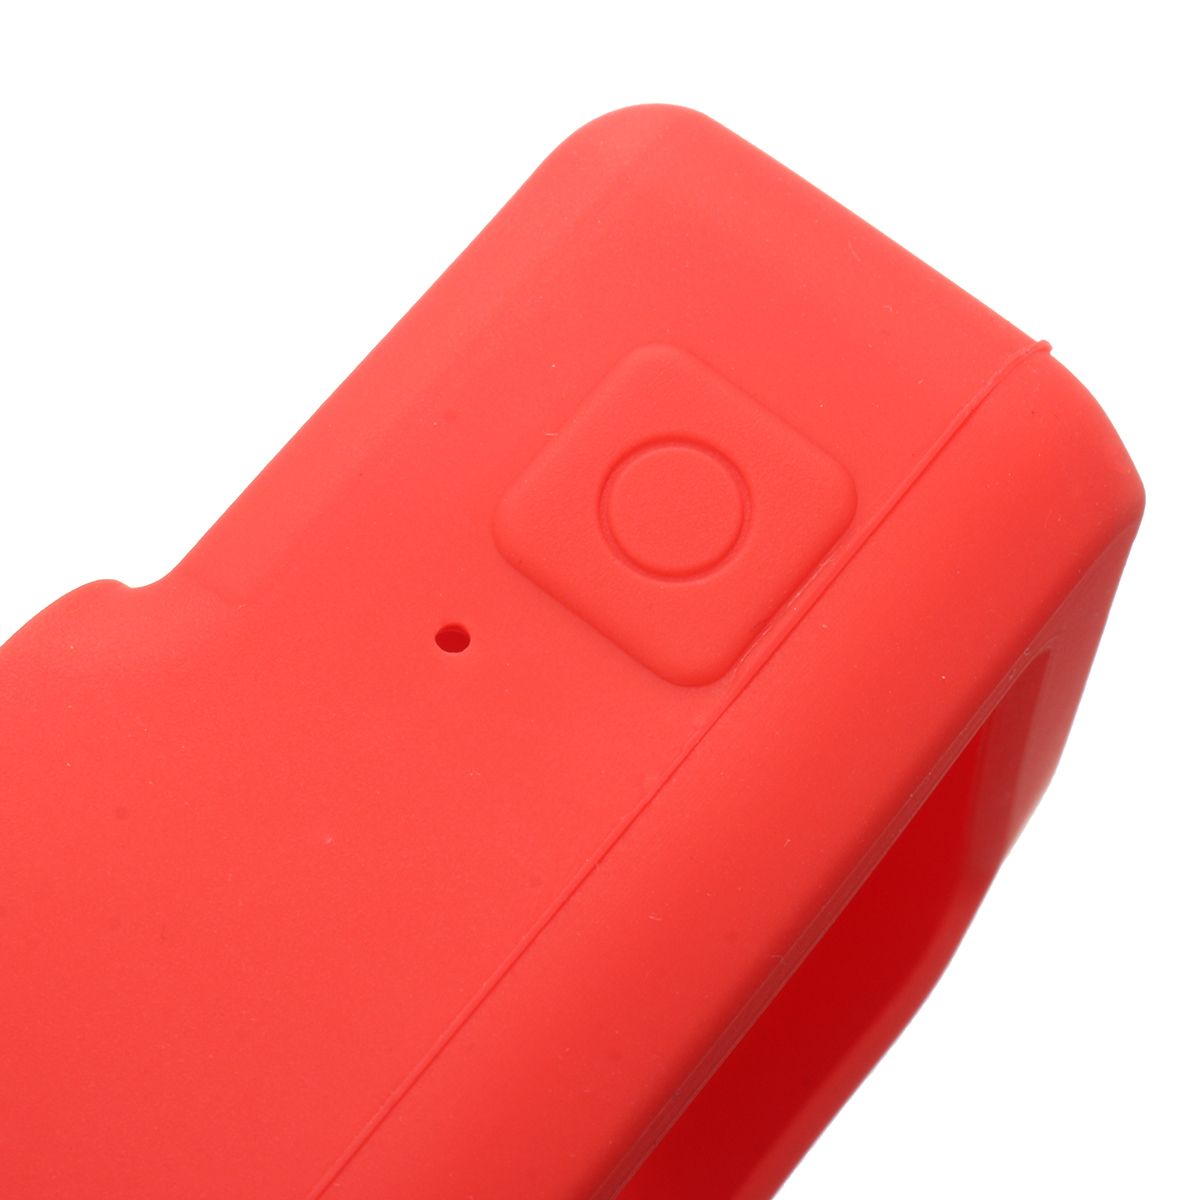 Soft-Silicone-Housing-Case-Protective-Cover-And-Lens-Cap-For-GoPro-Hero-5-Camera-1109058